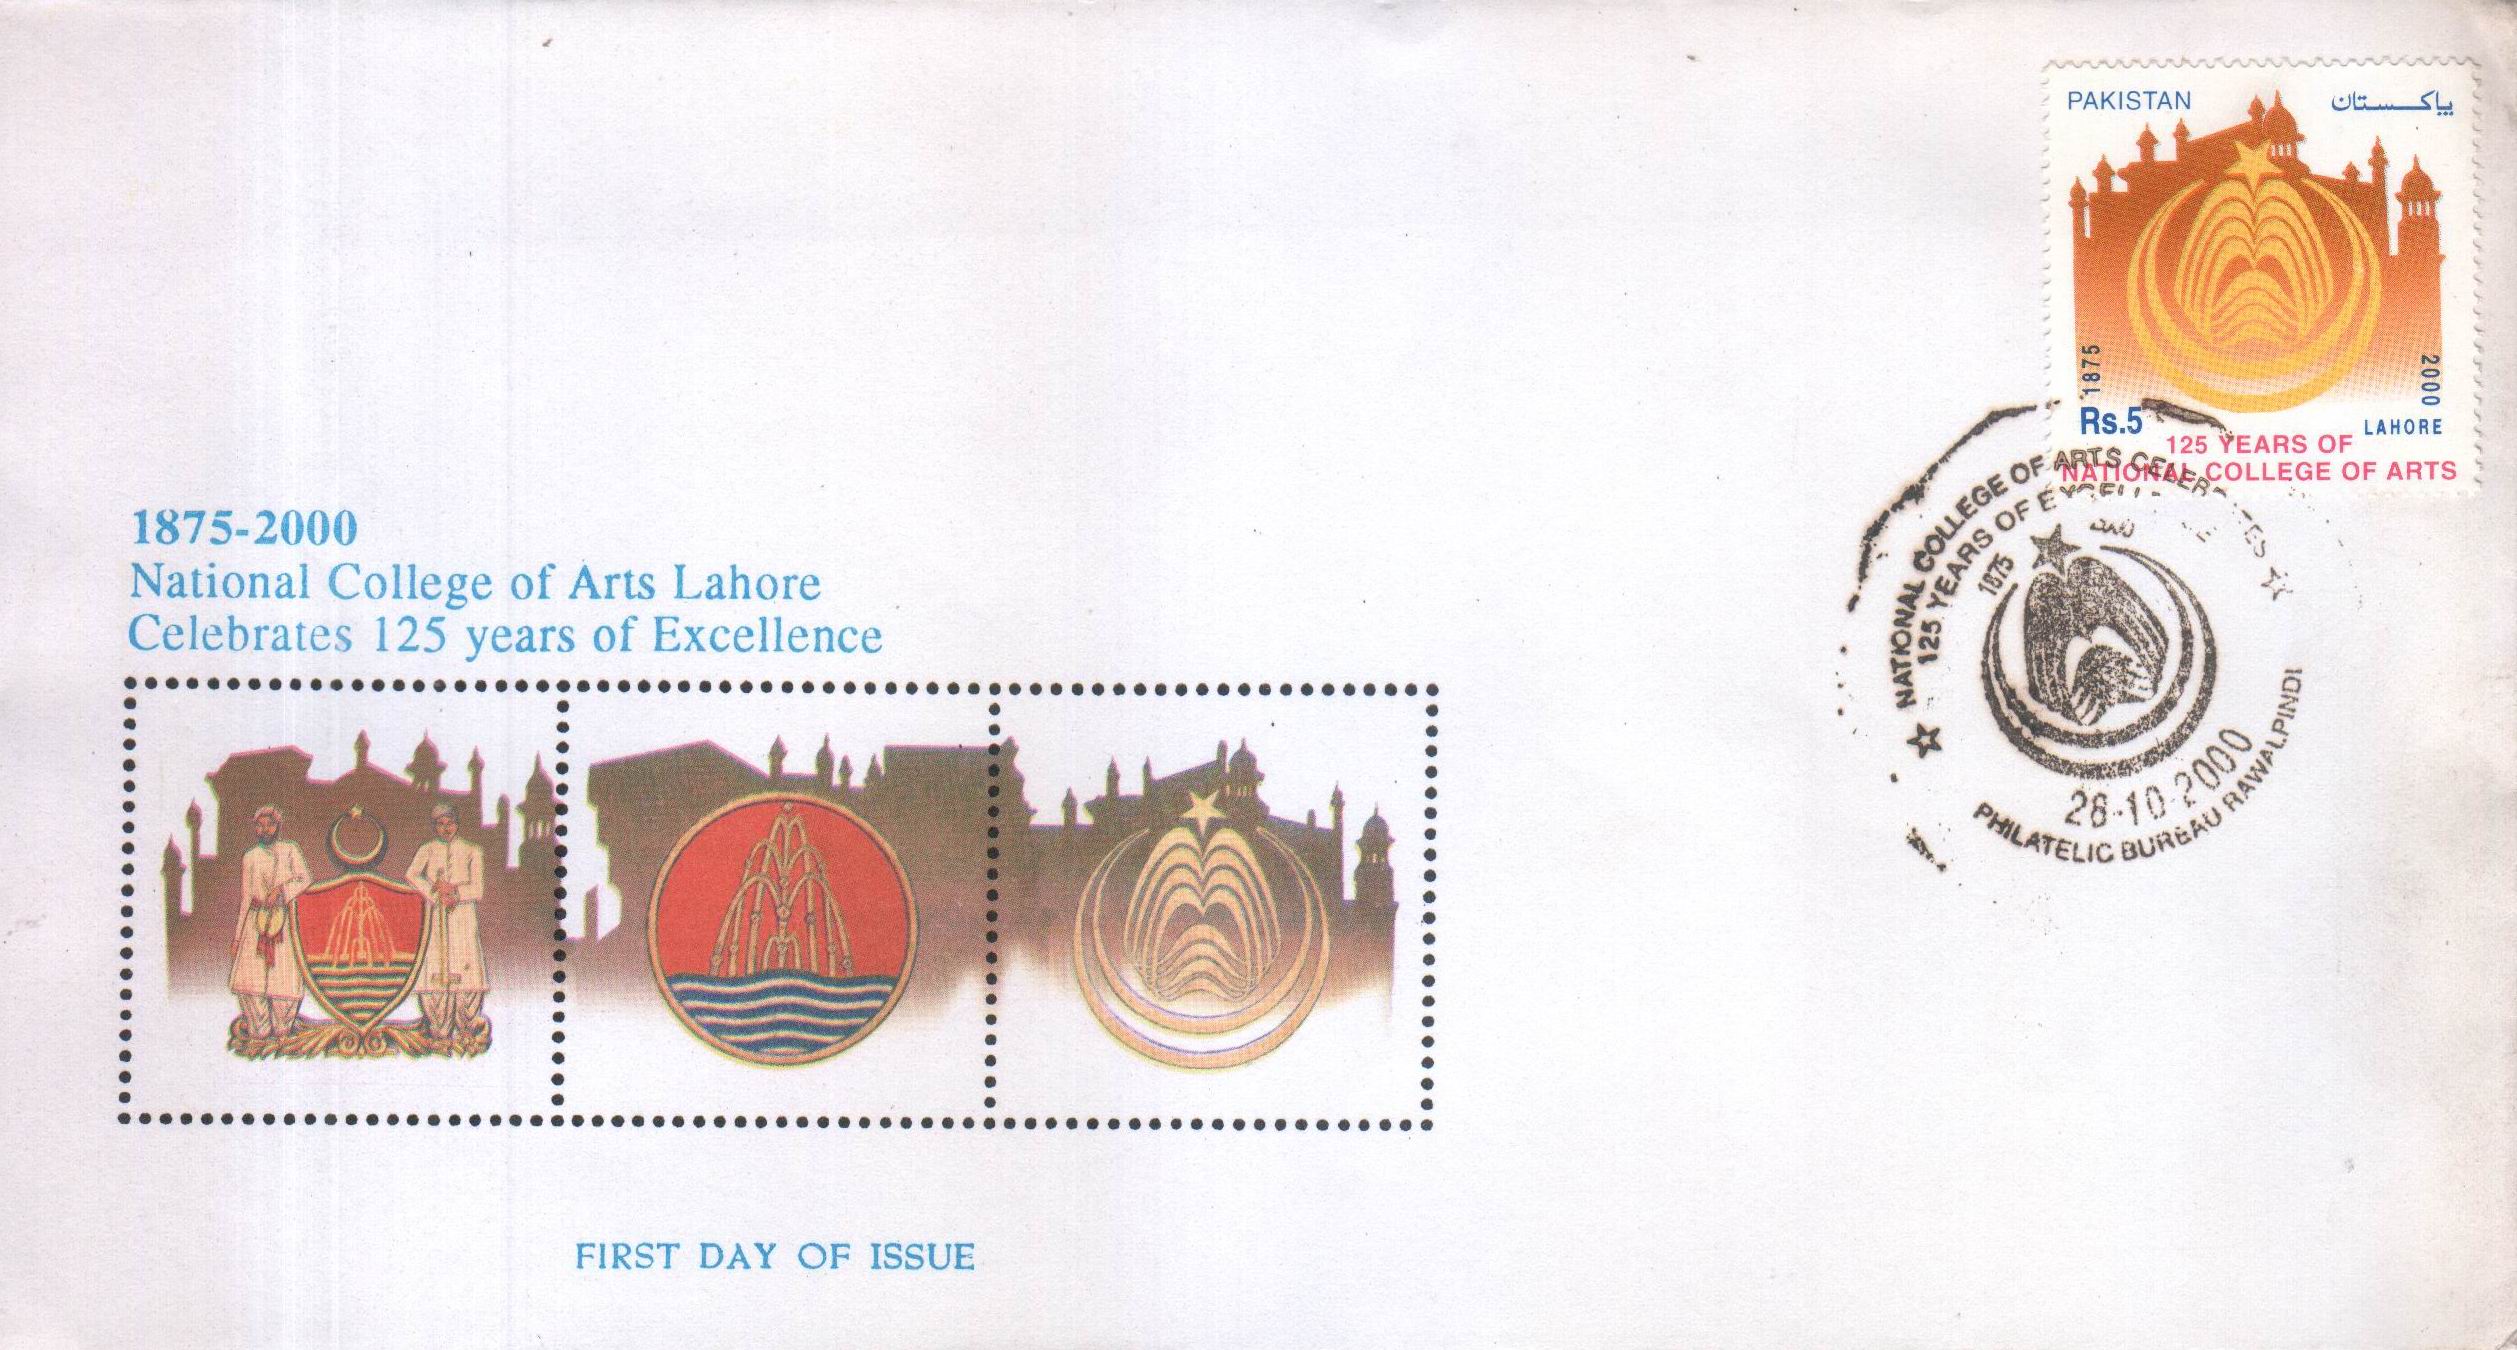 Pakistan Fdc 2000 & Stamp National College Of Arts Lahore